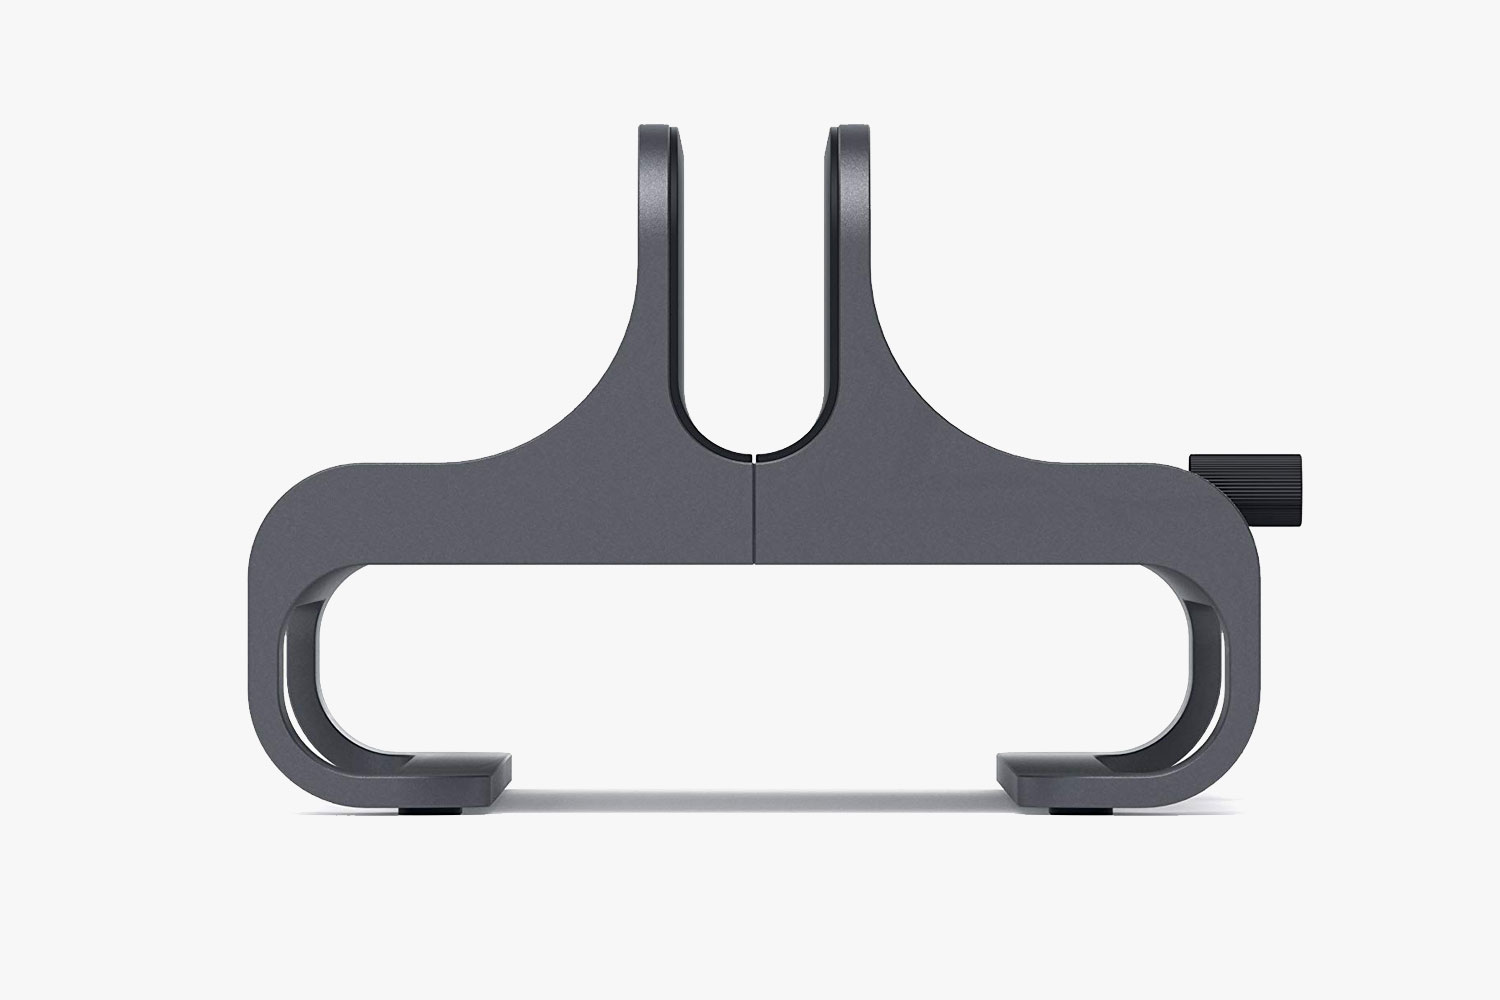 An Organizational Need - The Satechi Vertical Laptop Stand